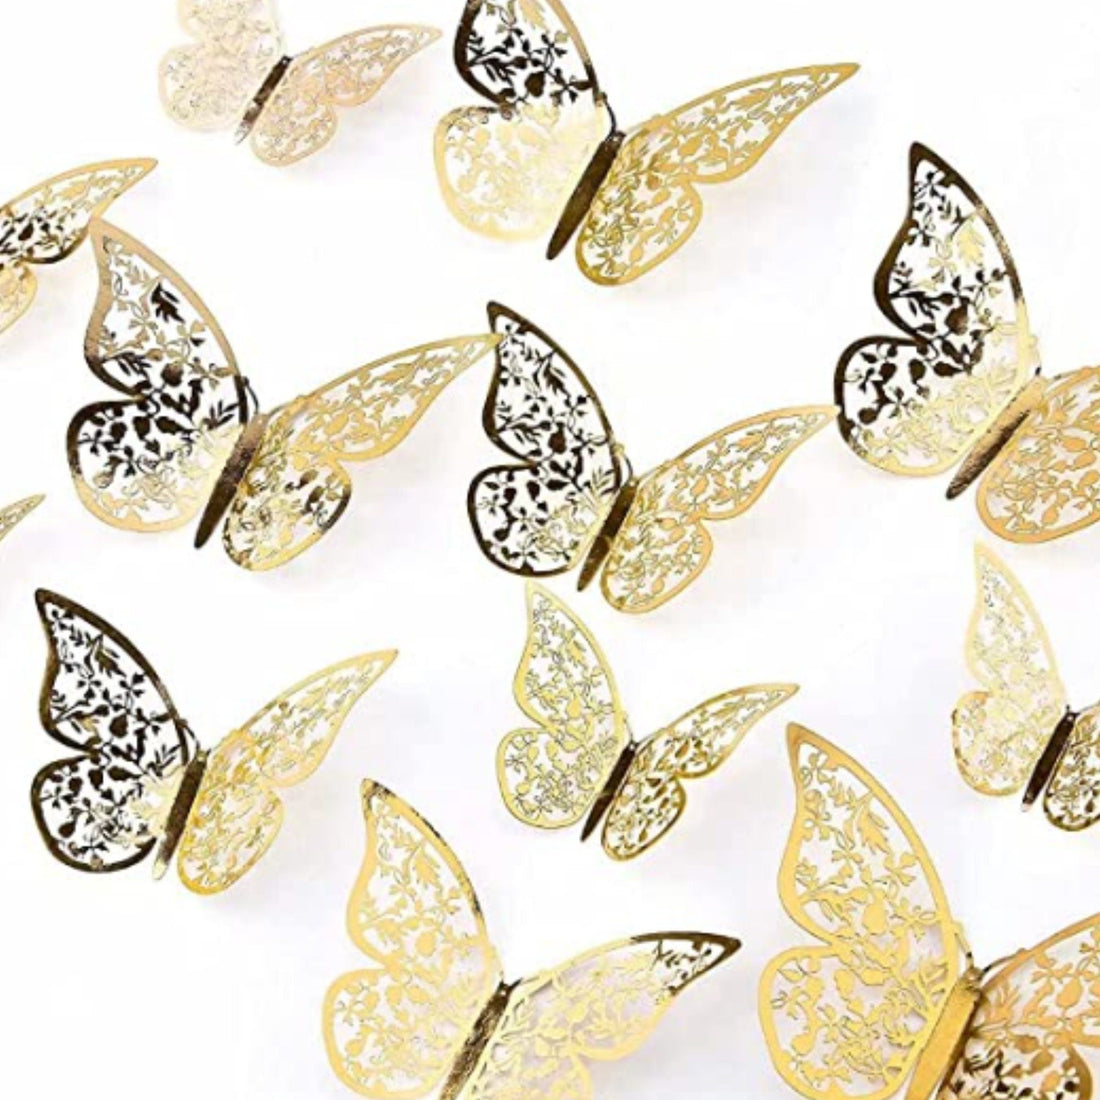 12 Pack of Foil Butterflies for Cake Decoration - Cake Topper Warehouse